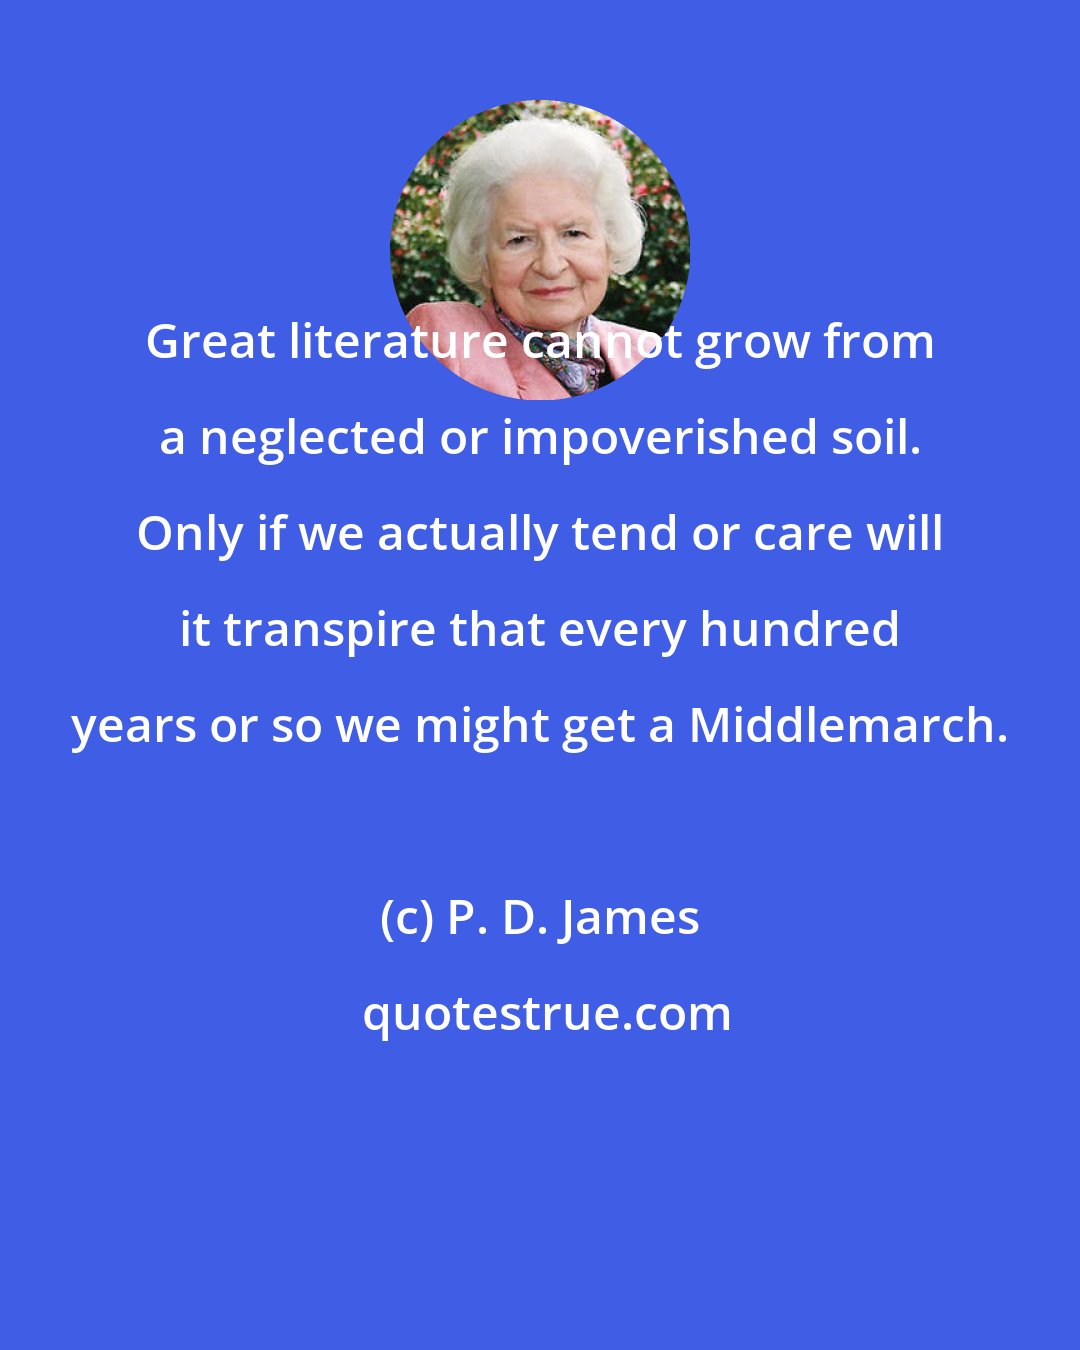 P. D. James: Great literature cannot grow from a neglected or impoverished soil. Only if we actually tend or care will it transpire that every hundred years or so we might get a Middlemarch.